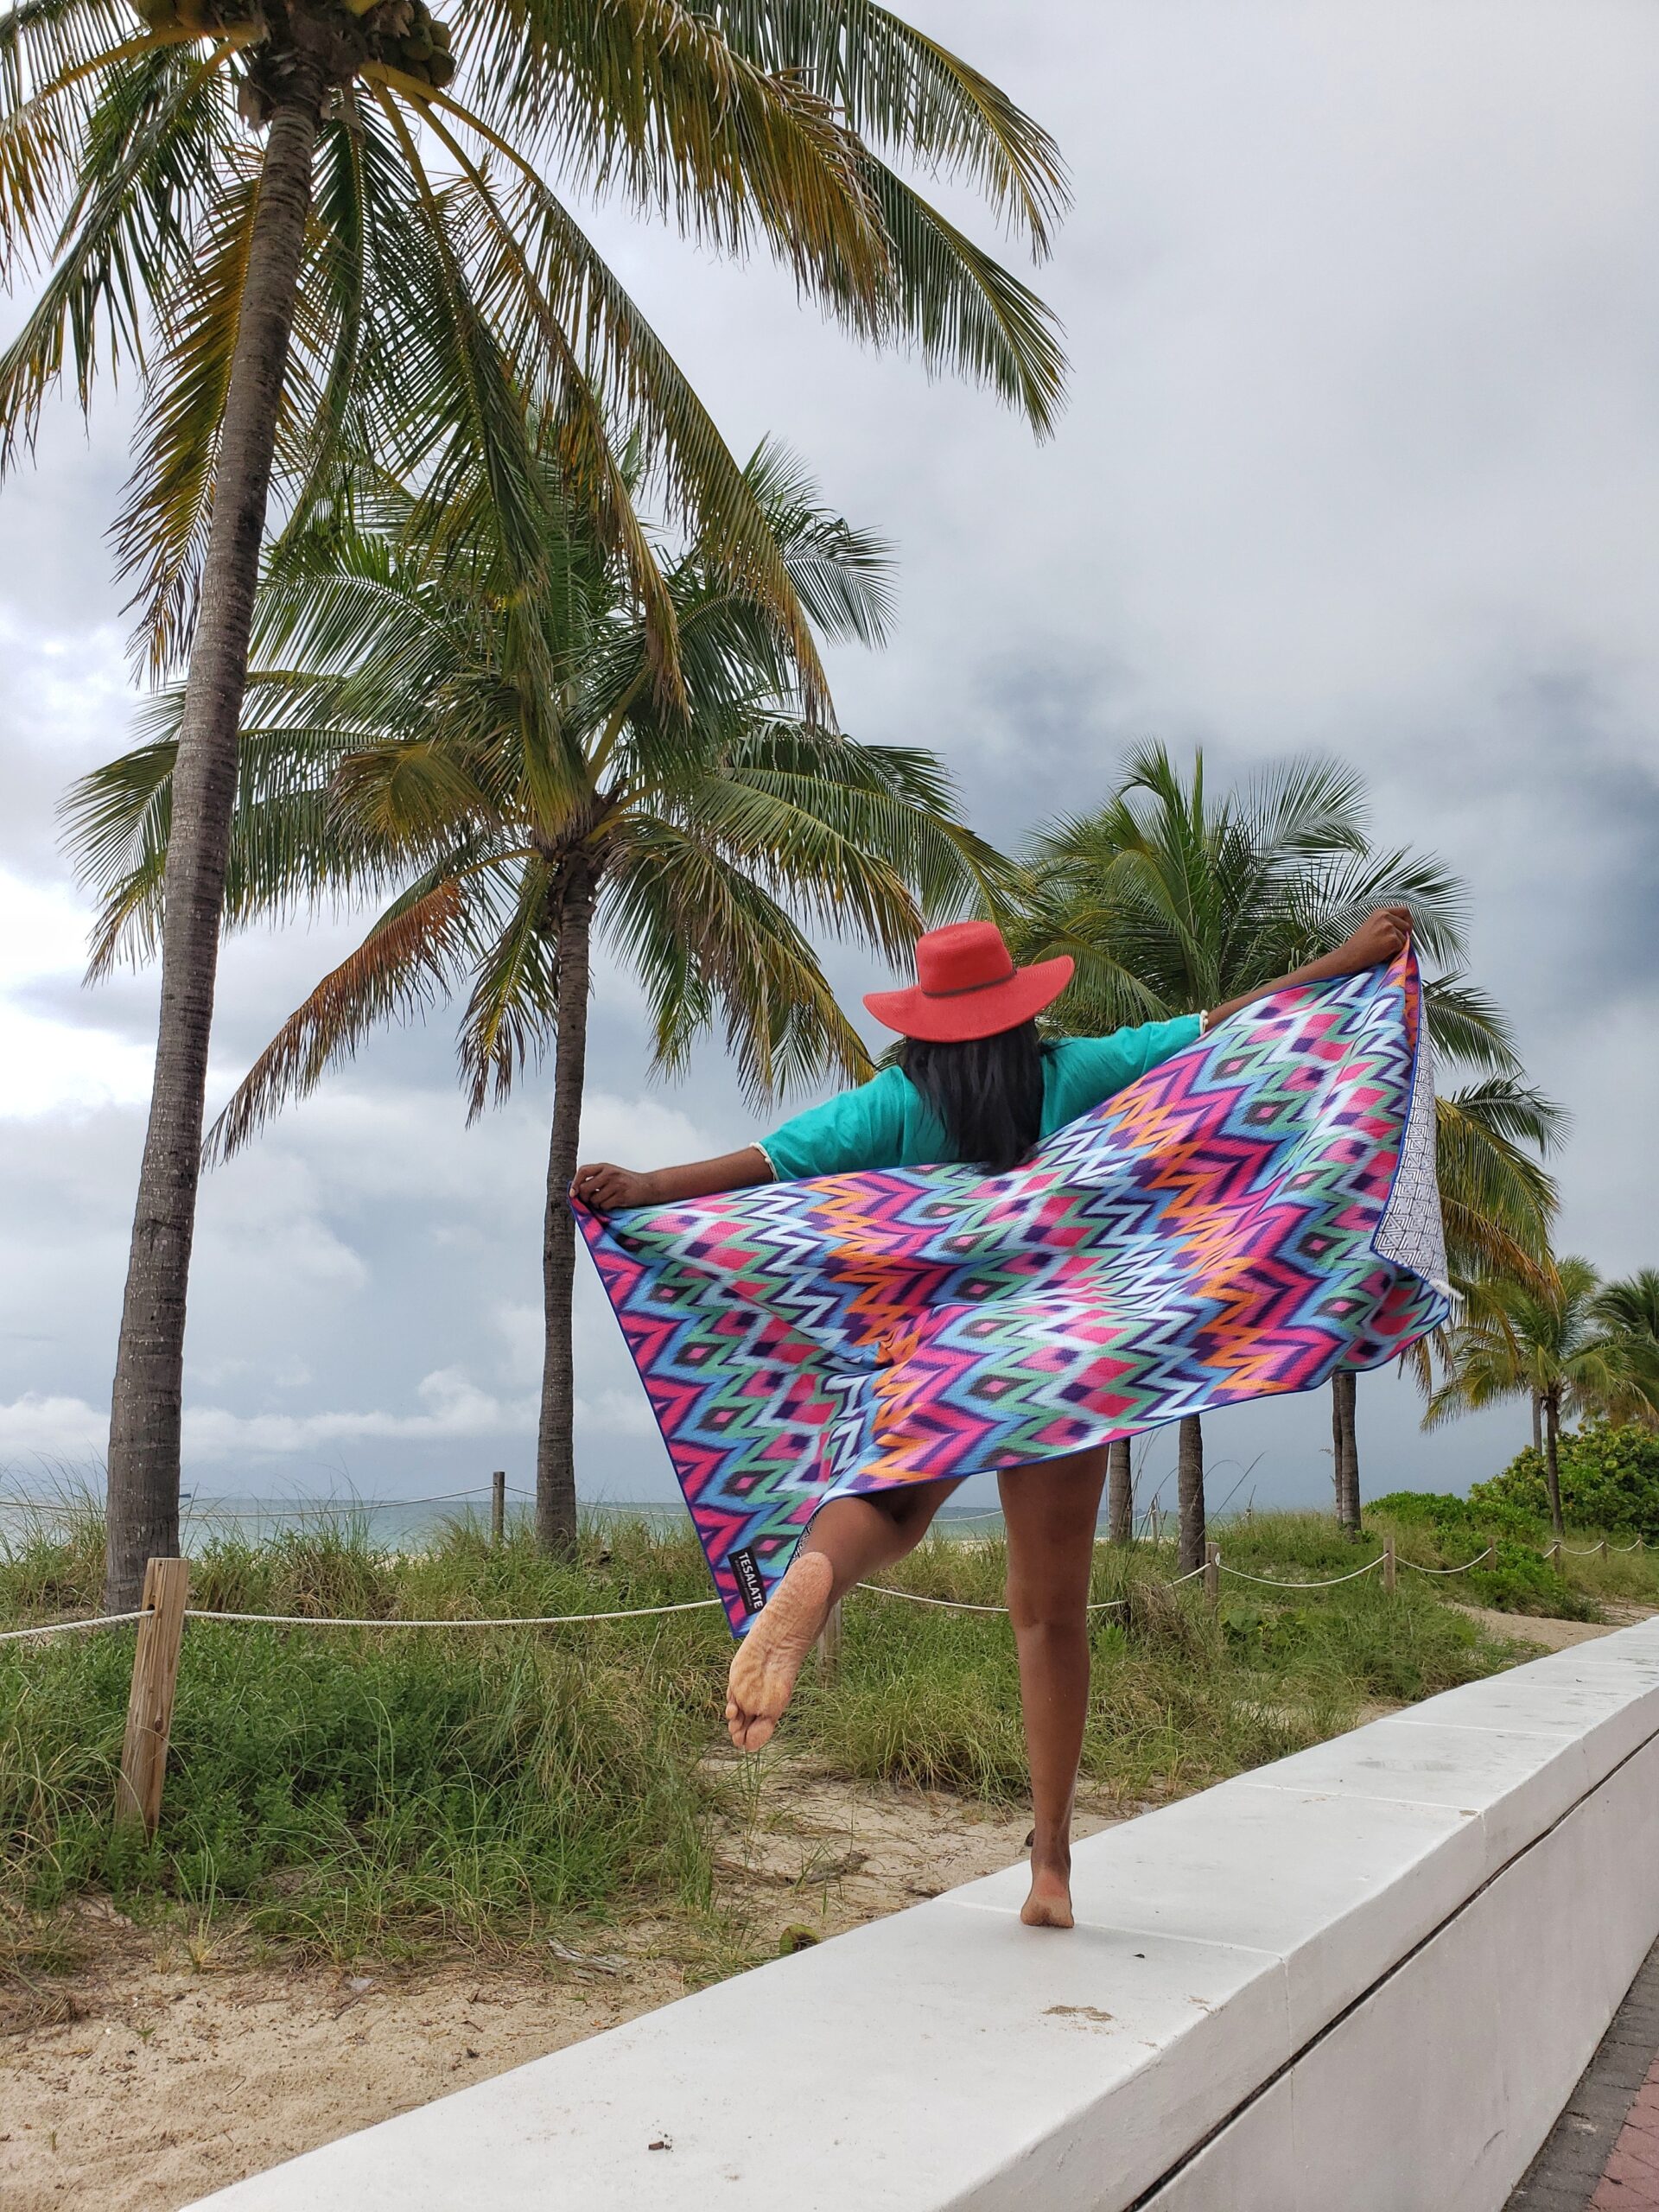 Jumping for joy with Tesalate sand free towel